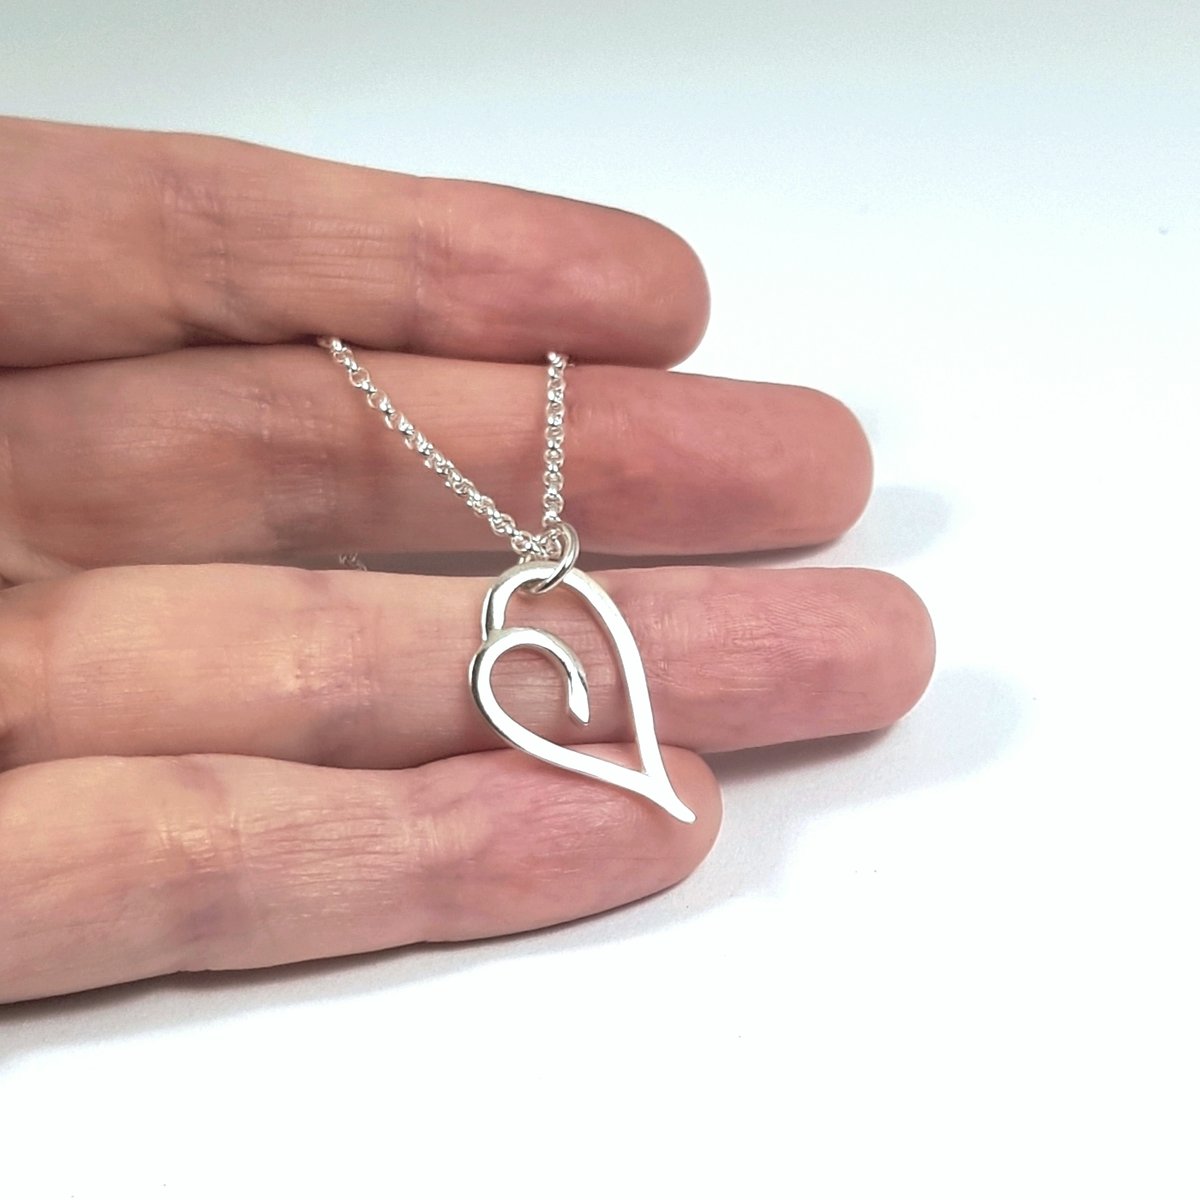 Image of Silver Heart Necklace, Handmade Sterling Silver Heart Pendant, Sustainable Recycled Silver Jewellery